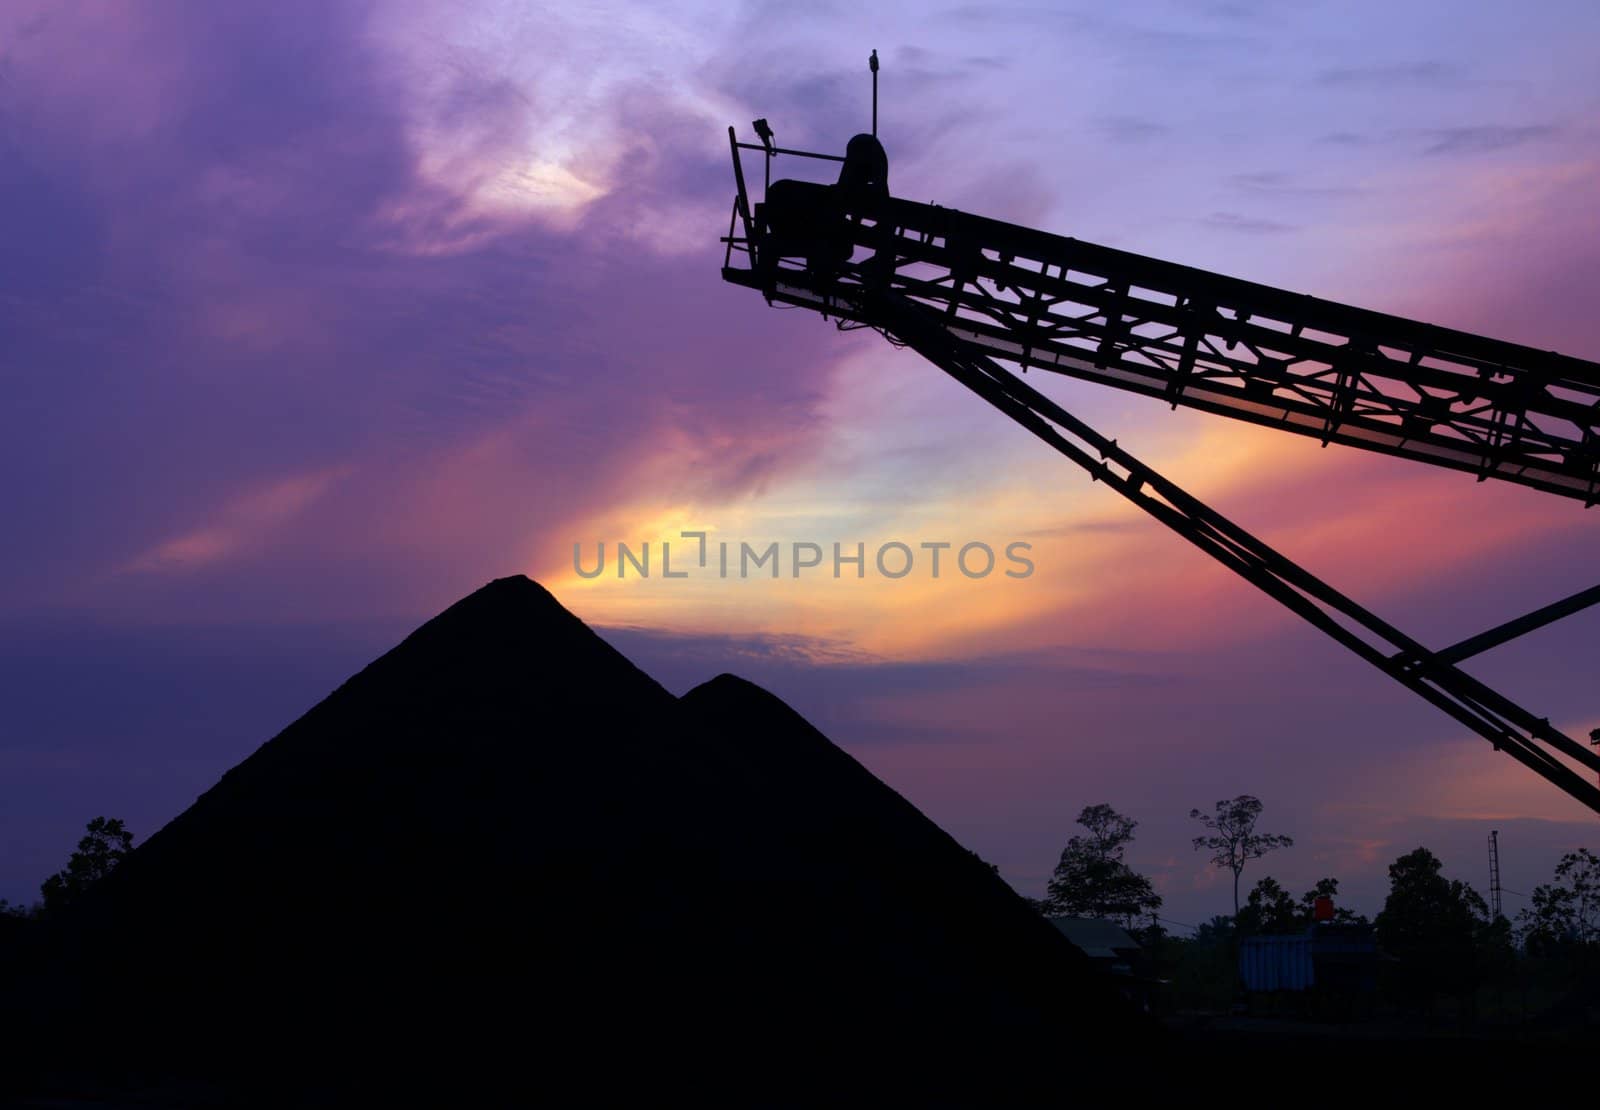 Coal stock pile at sunrise by photosoup